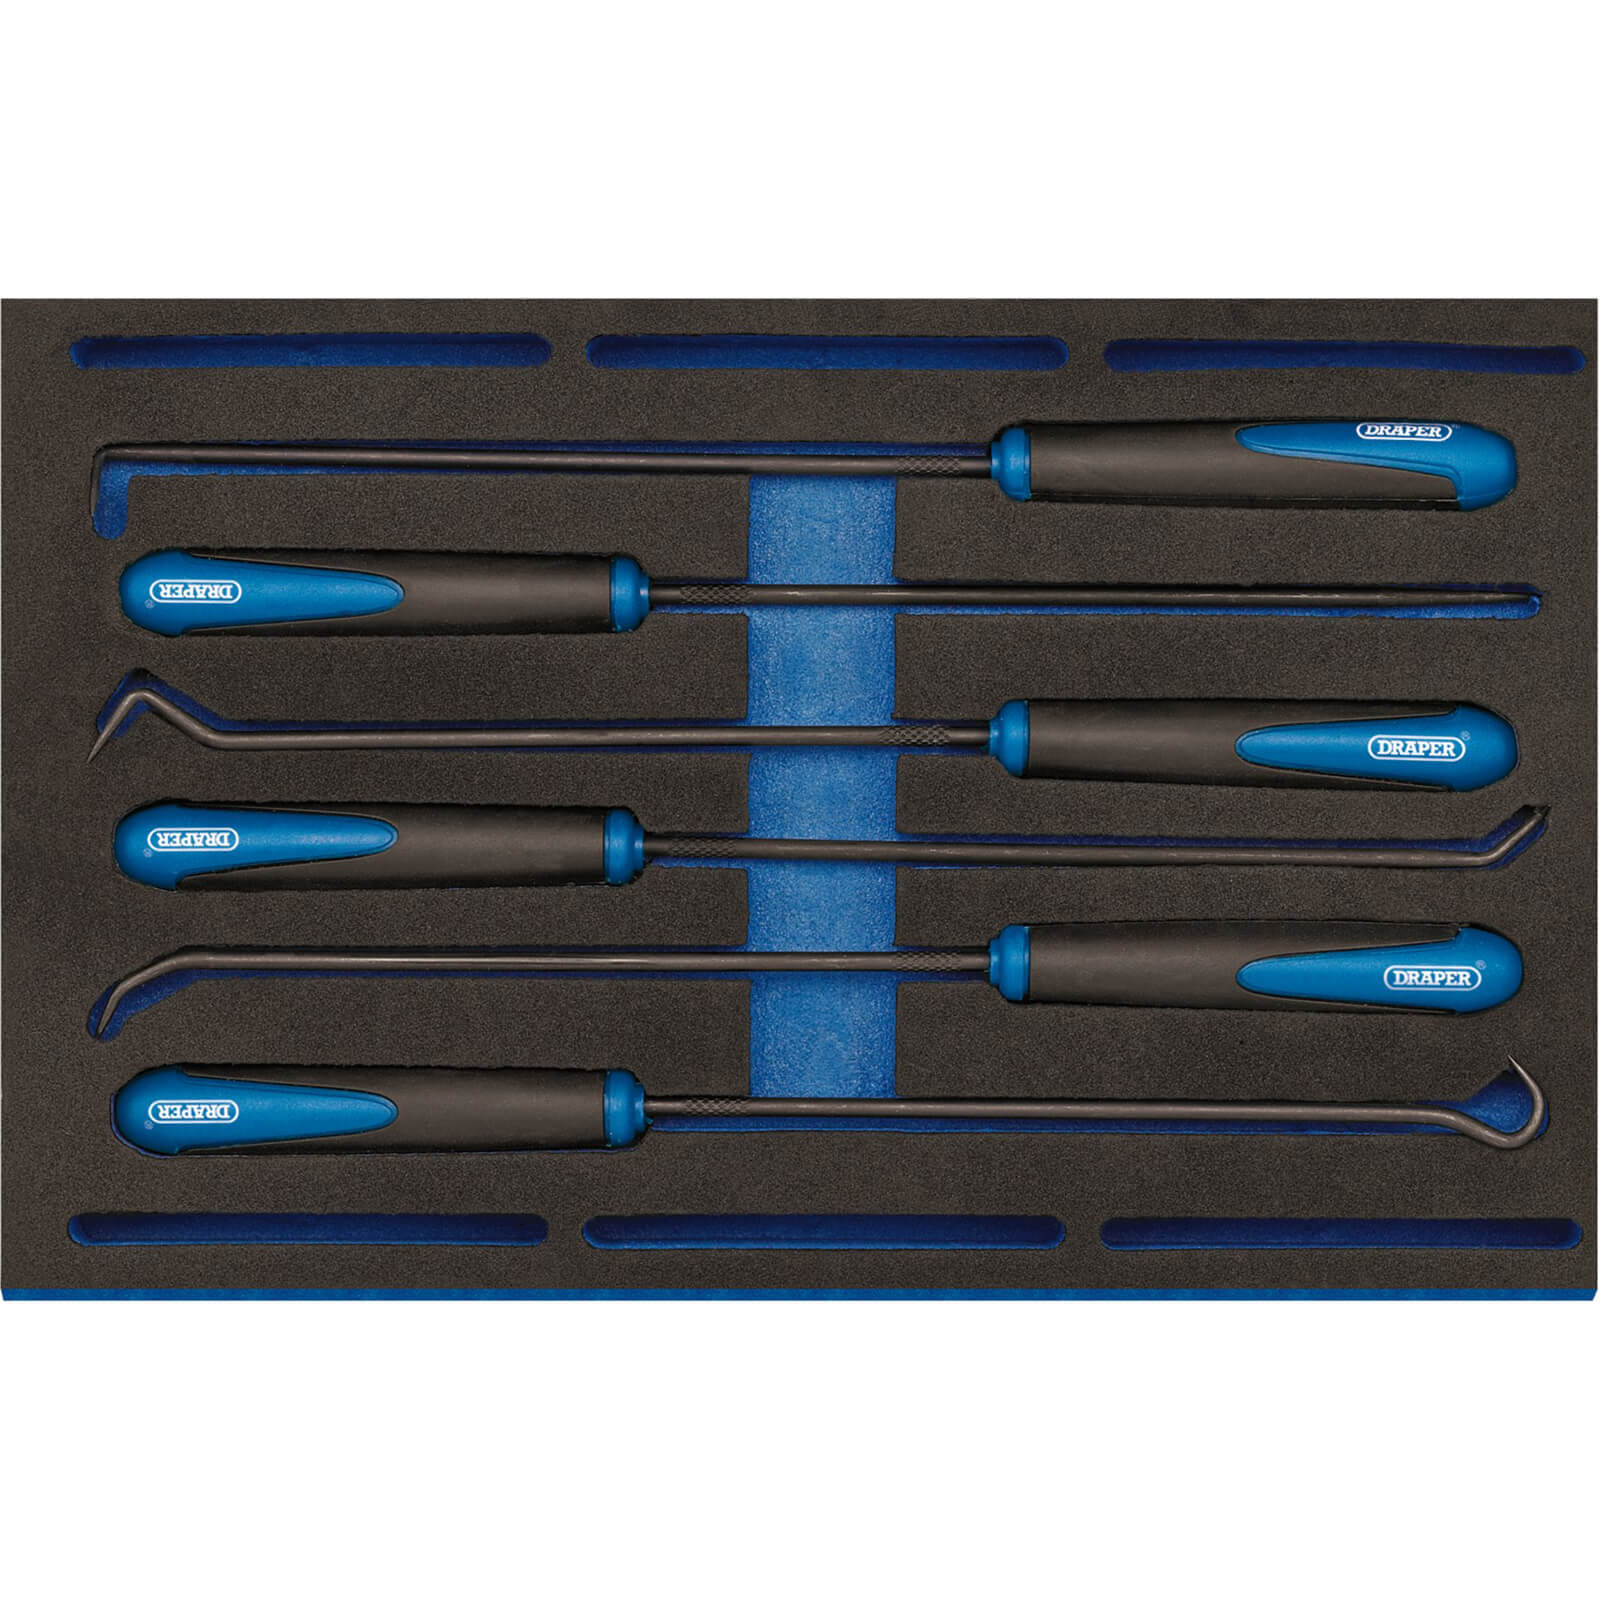 Image of Draper 6 Piece Long Reach Hook and Pick Set In Eva Insert Tray